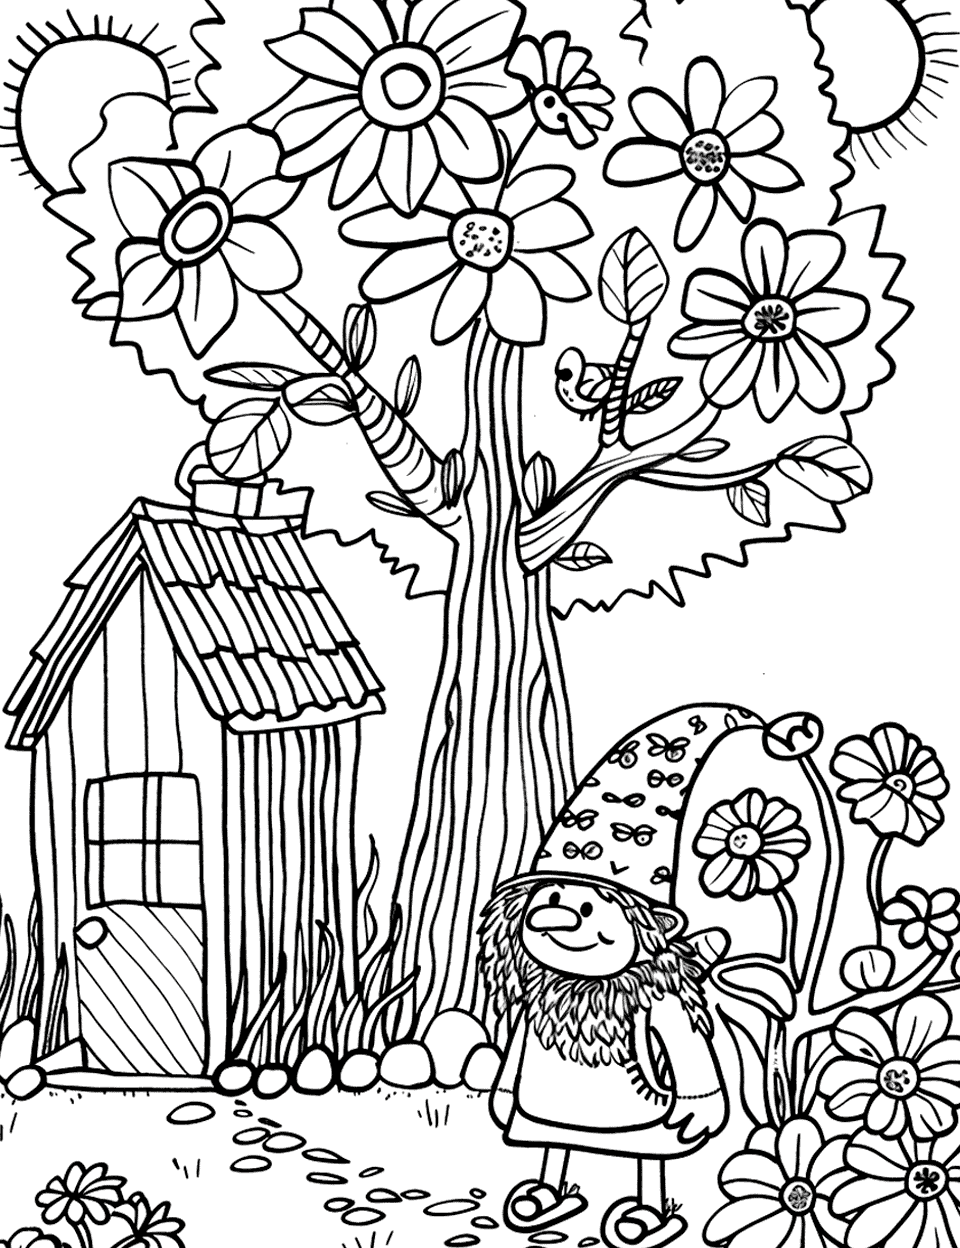 Gnome Home by a Tree Garden Coloring Page - A whimsical gnome standing beside his tiny house under a tree, with flowers around.